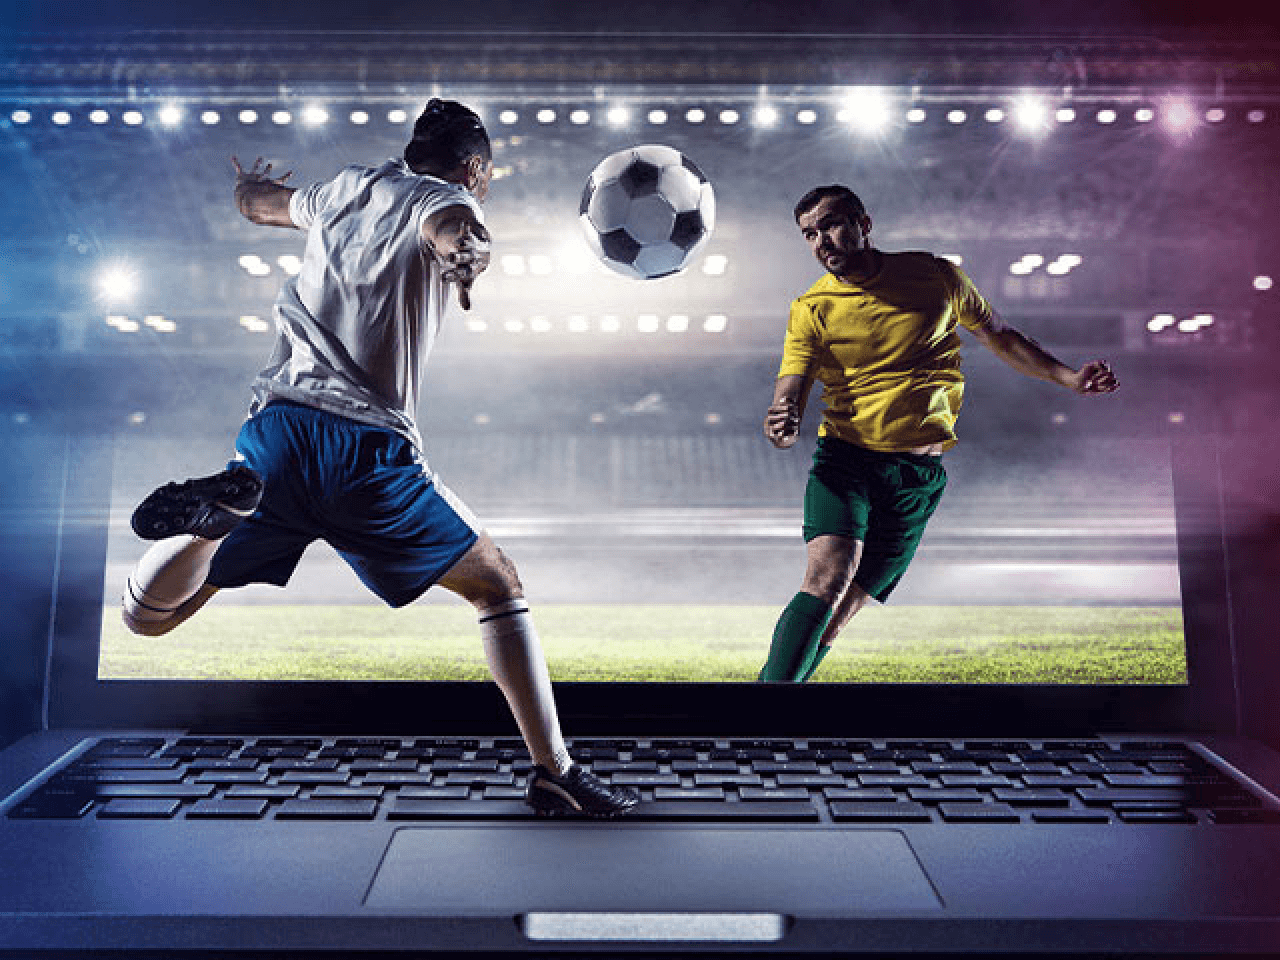 sports betting sites in siprus: Back To Basics